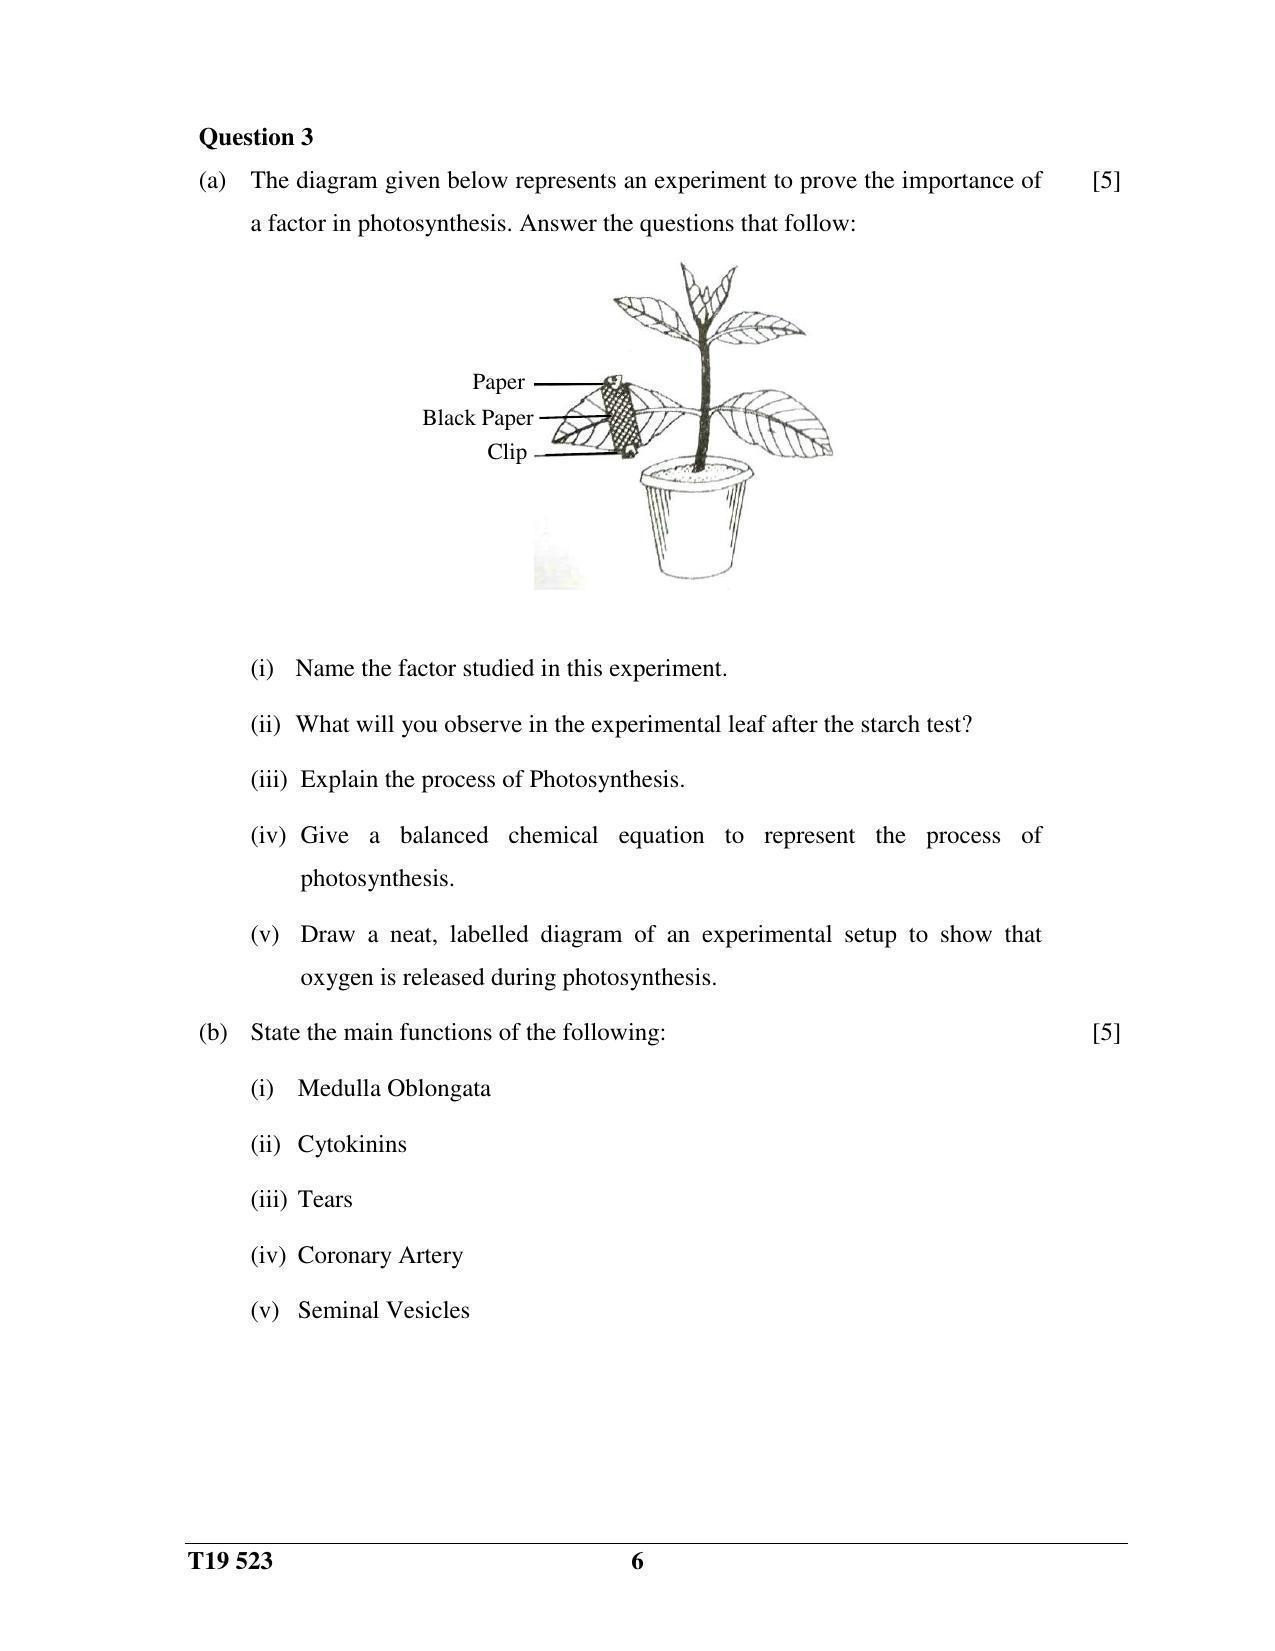 ICSE Class 10 Science Paper 3 (Biology) 2019 Question Paper - Page 6